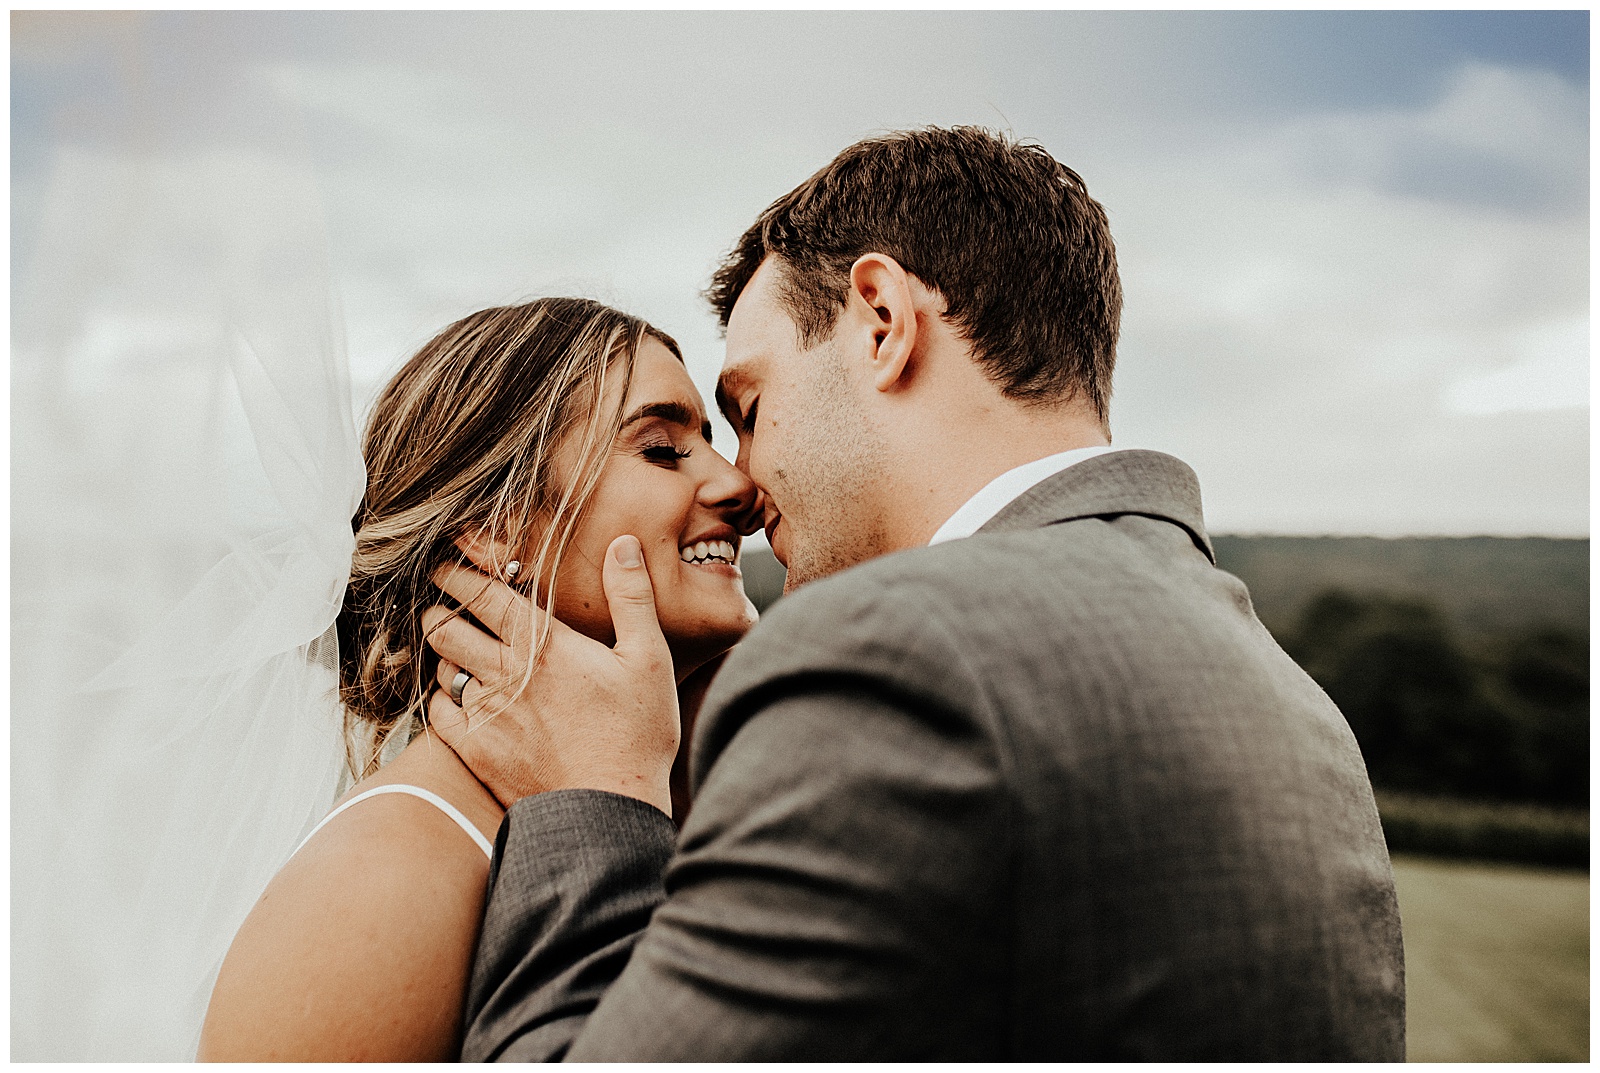 couples portraits intimate winery wedding in maryland captured by Brey Photo, delaware county photographer